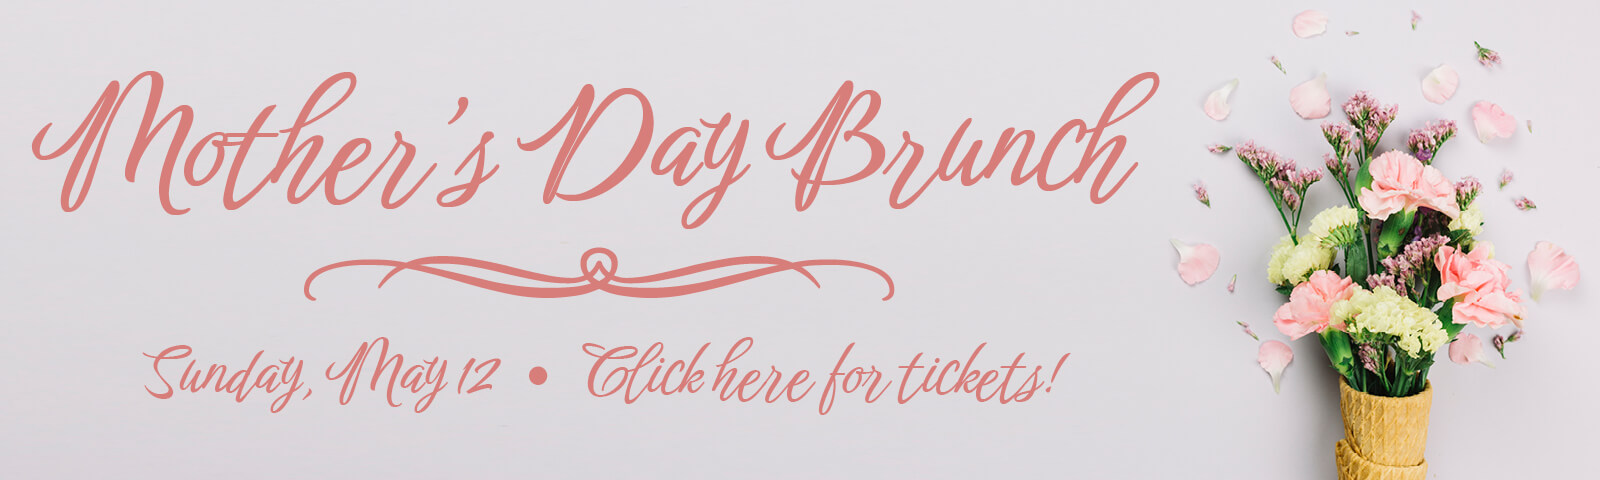 Mother's Day Brunch — Sunday, May 12 — Click here for tickets